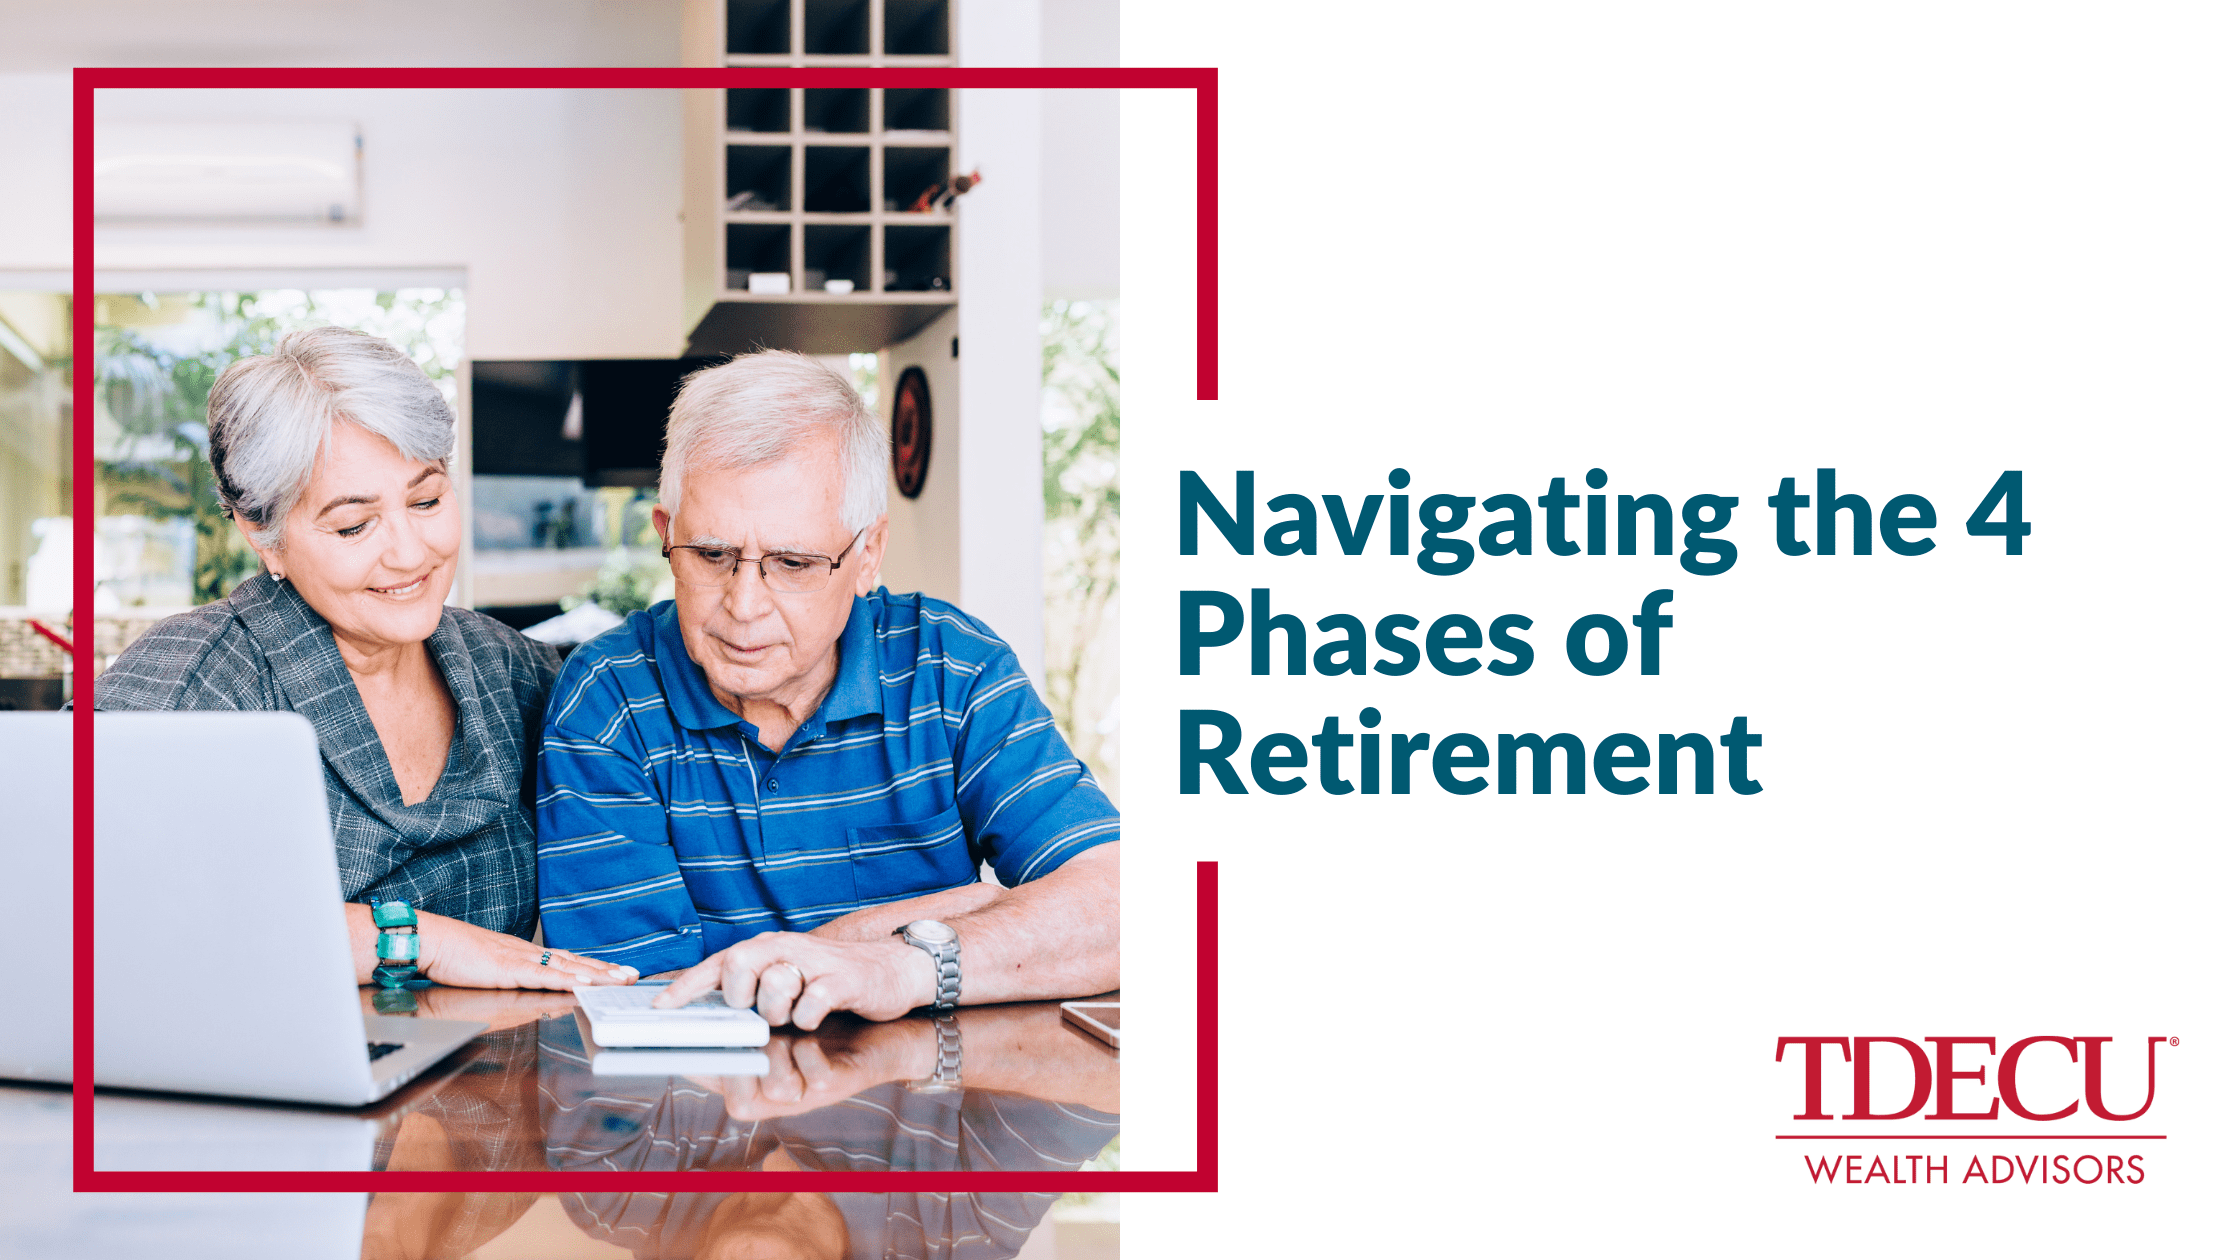 Navigating the 4 Phases of Retirement